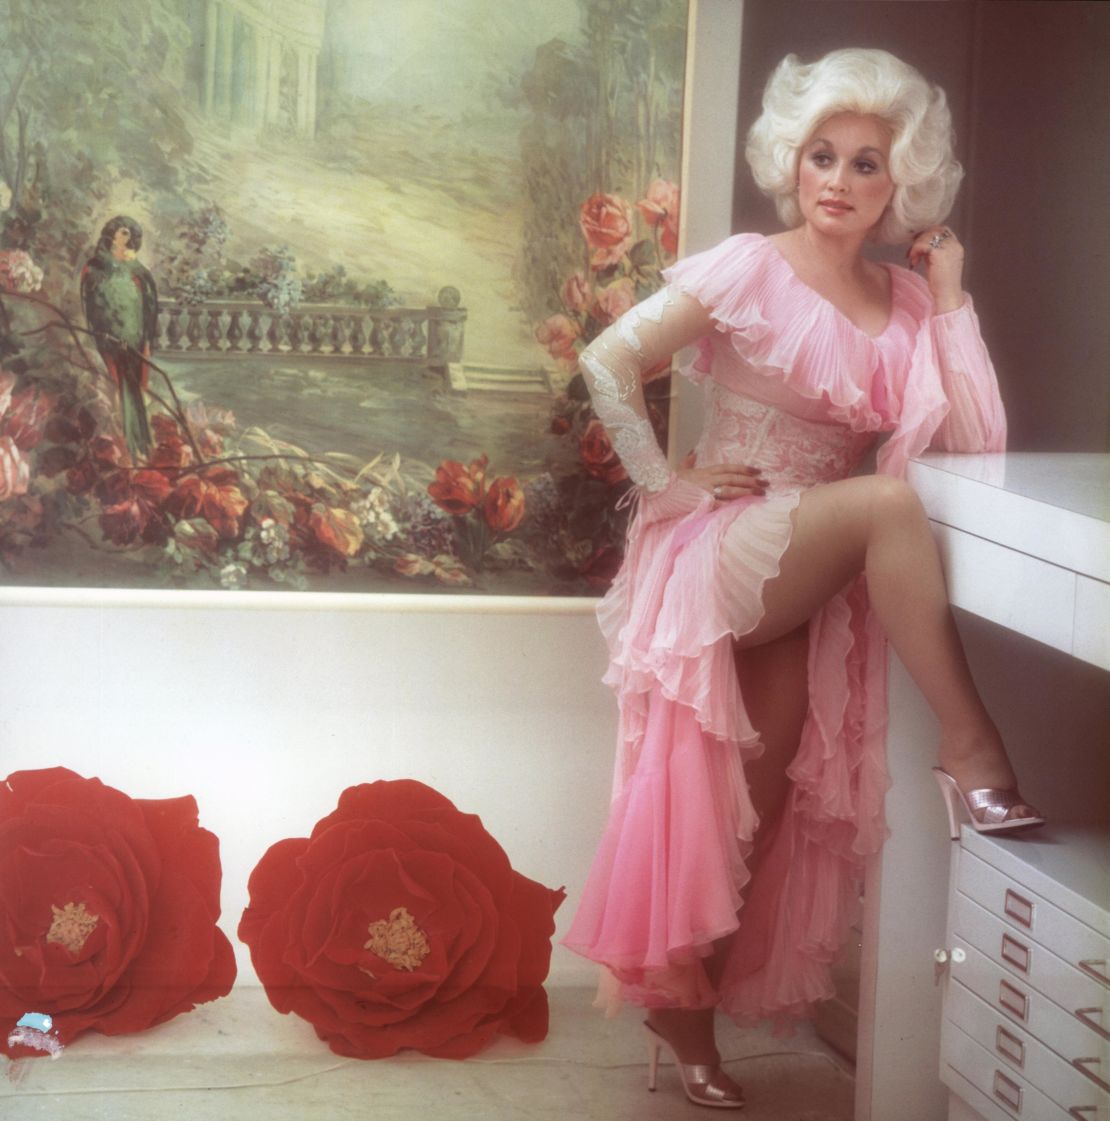 Dolly Parton during the photoshoot for the cover of her album "Heartbreaker," 1978 